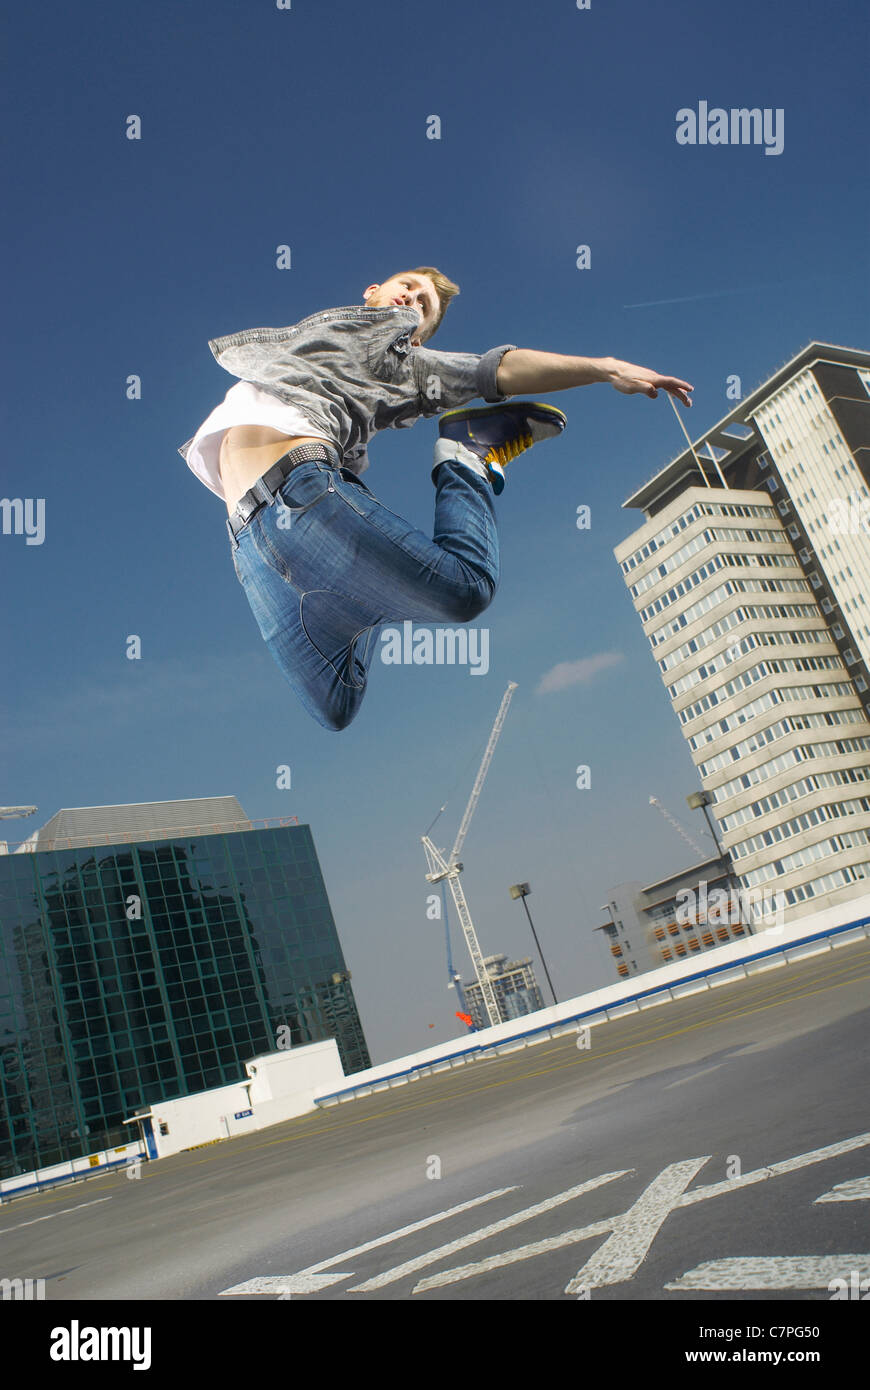 Man jumping on urban rooftop Stock Photo